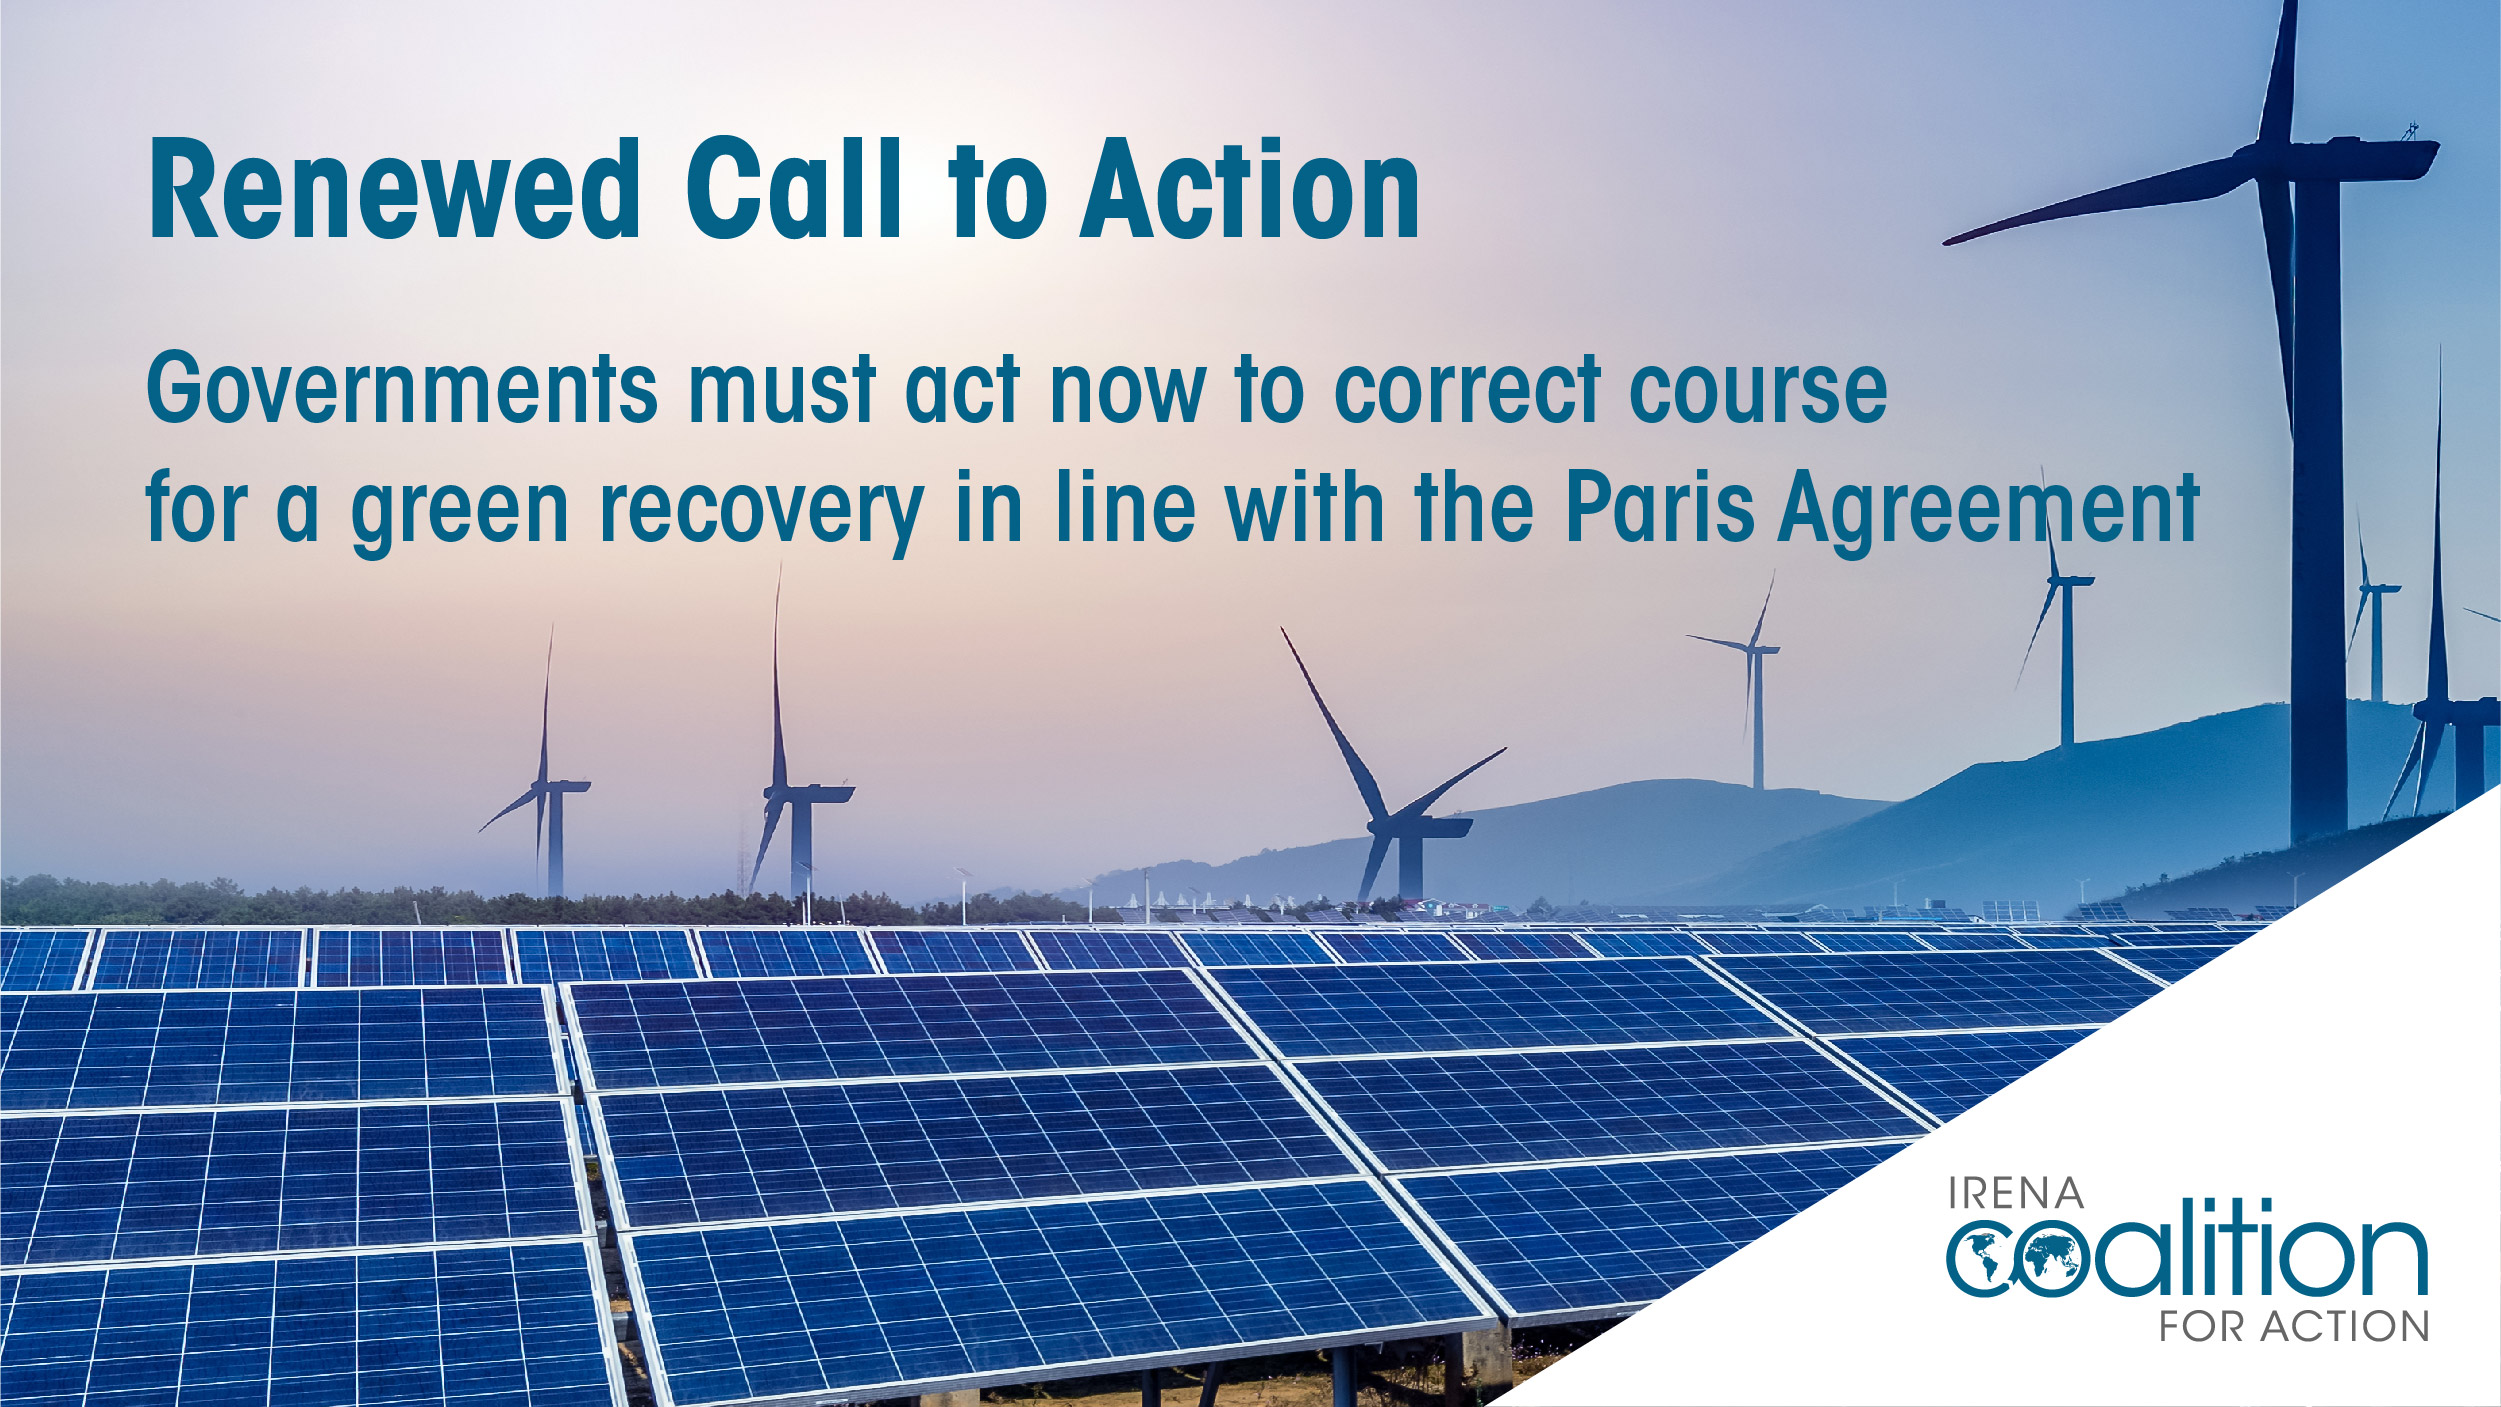 Leading Renewable Players Urge Governments to Re-align Recovery Measures with Paris Agreement